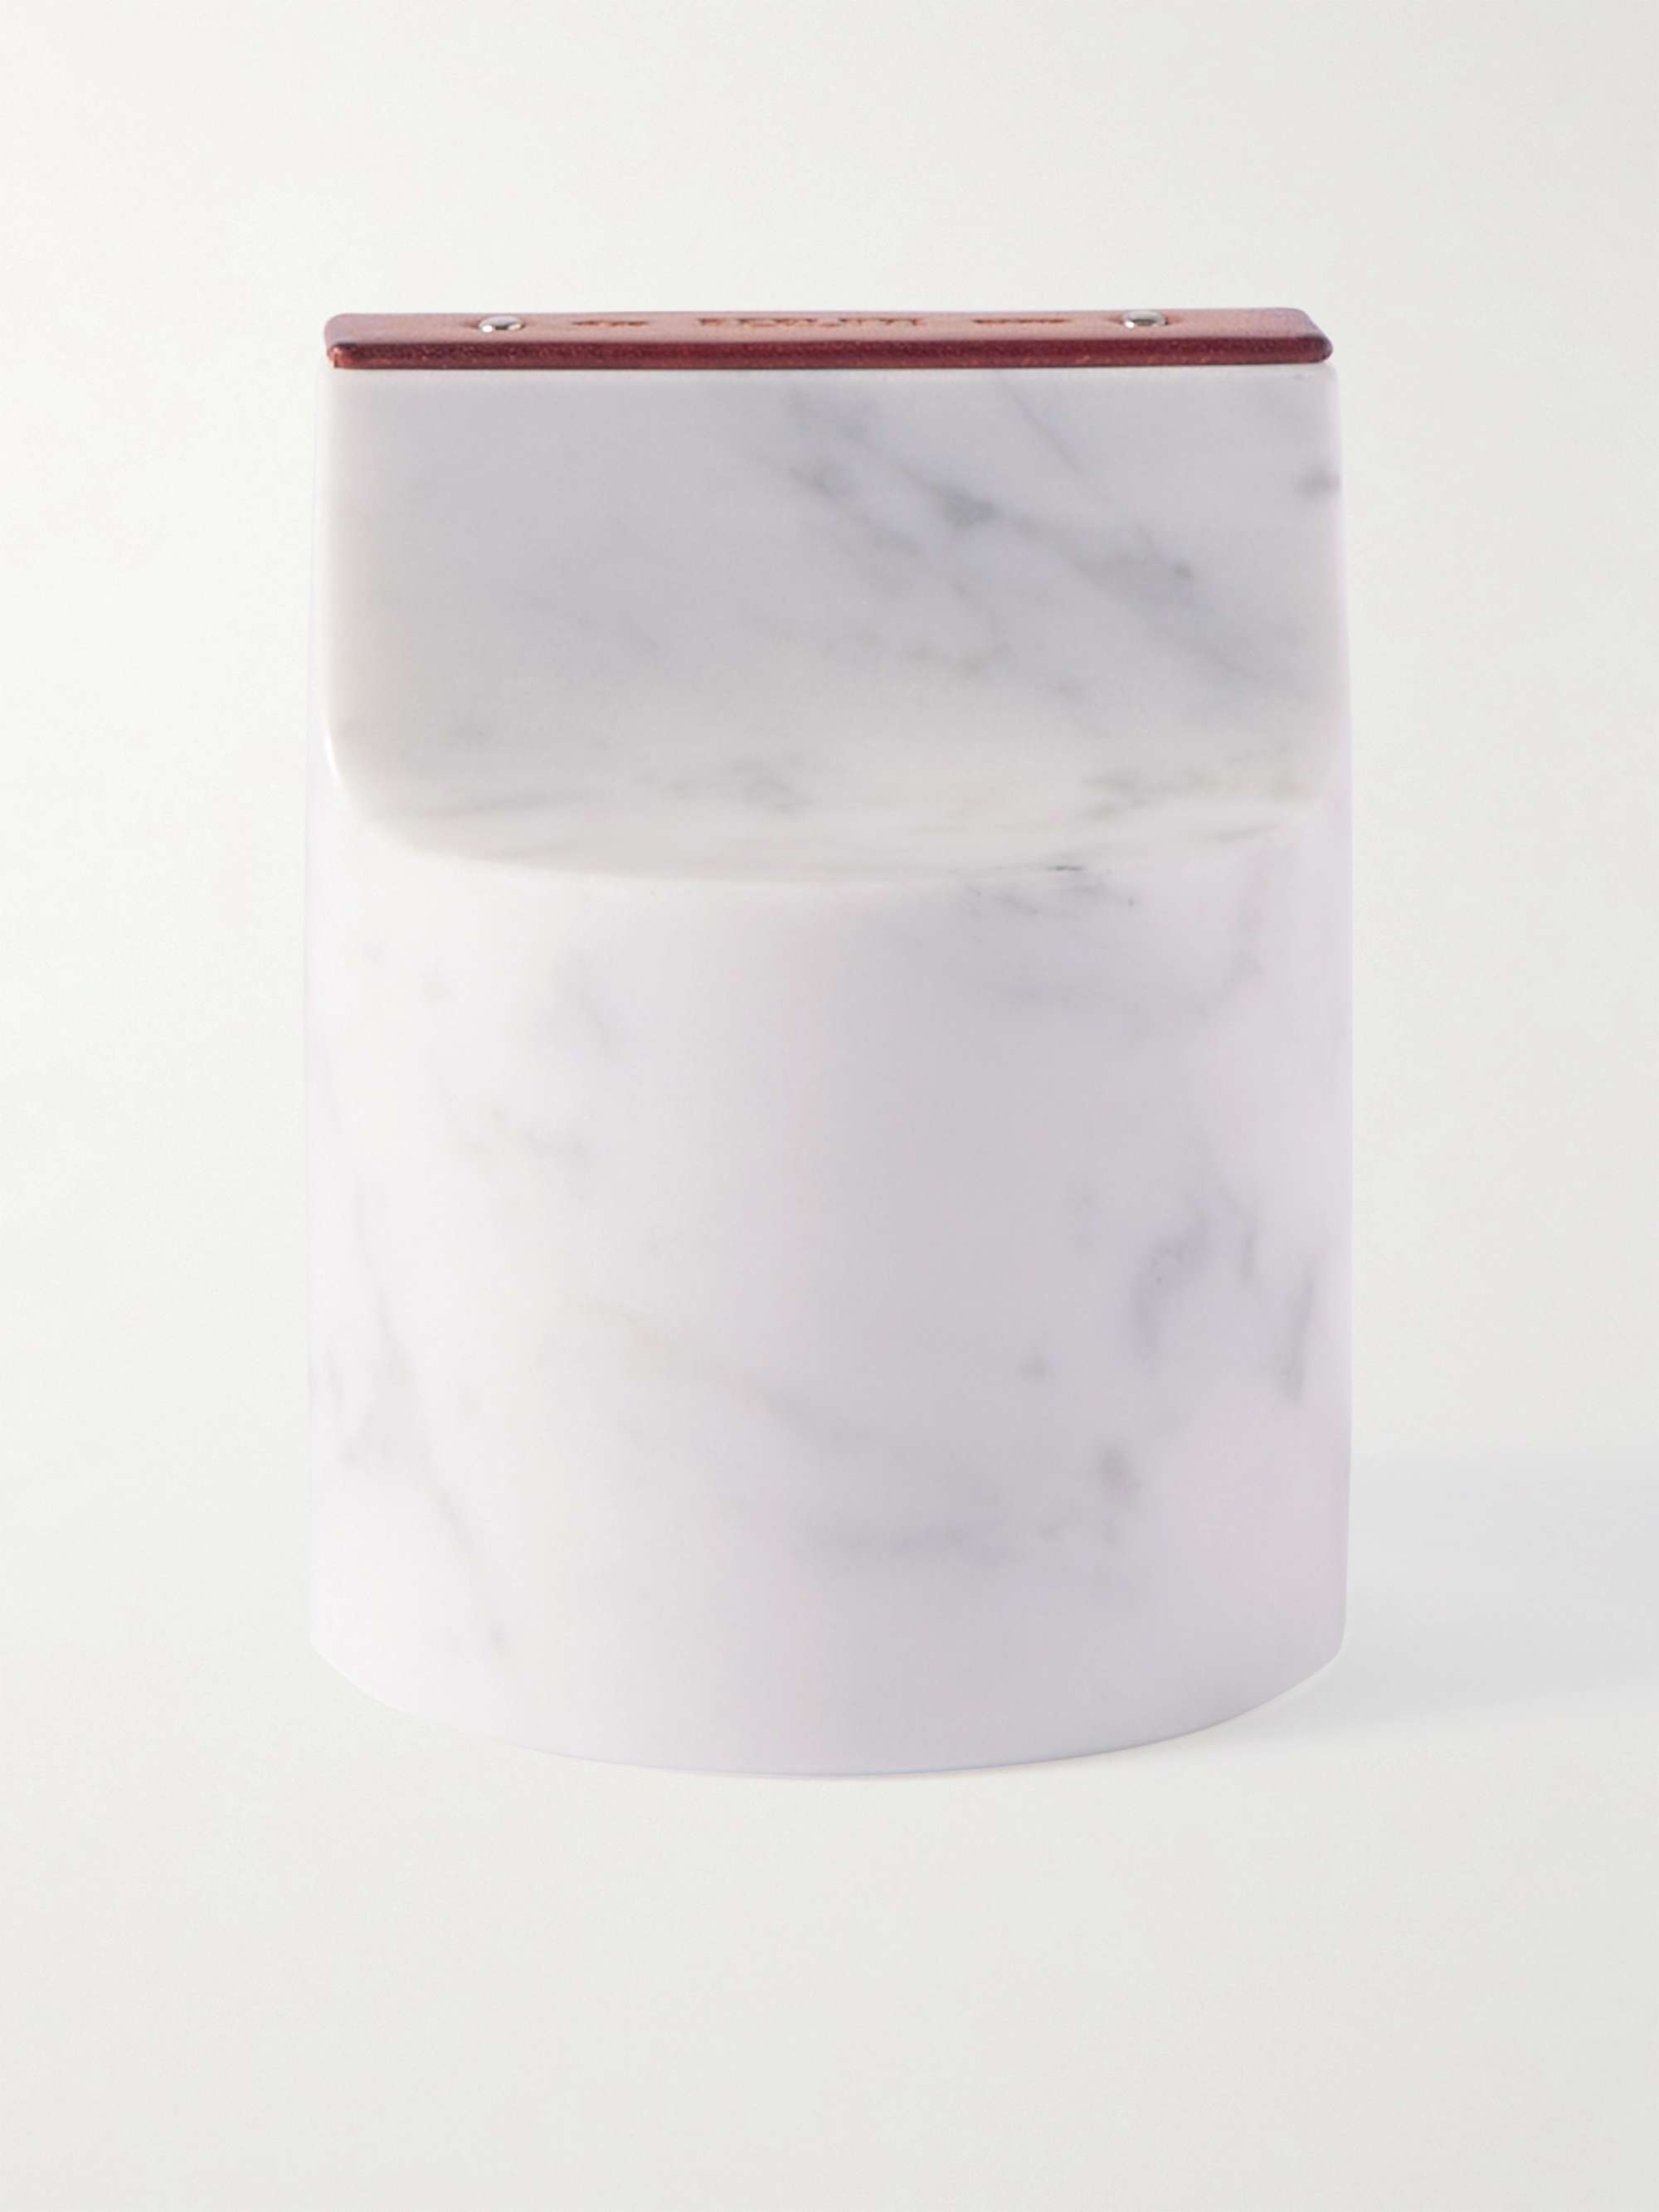 BERLUTI Venezia Leather-Trimmed Marble Paperweight